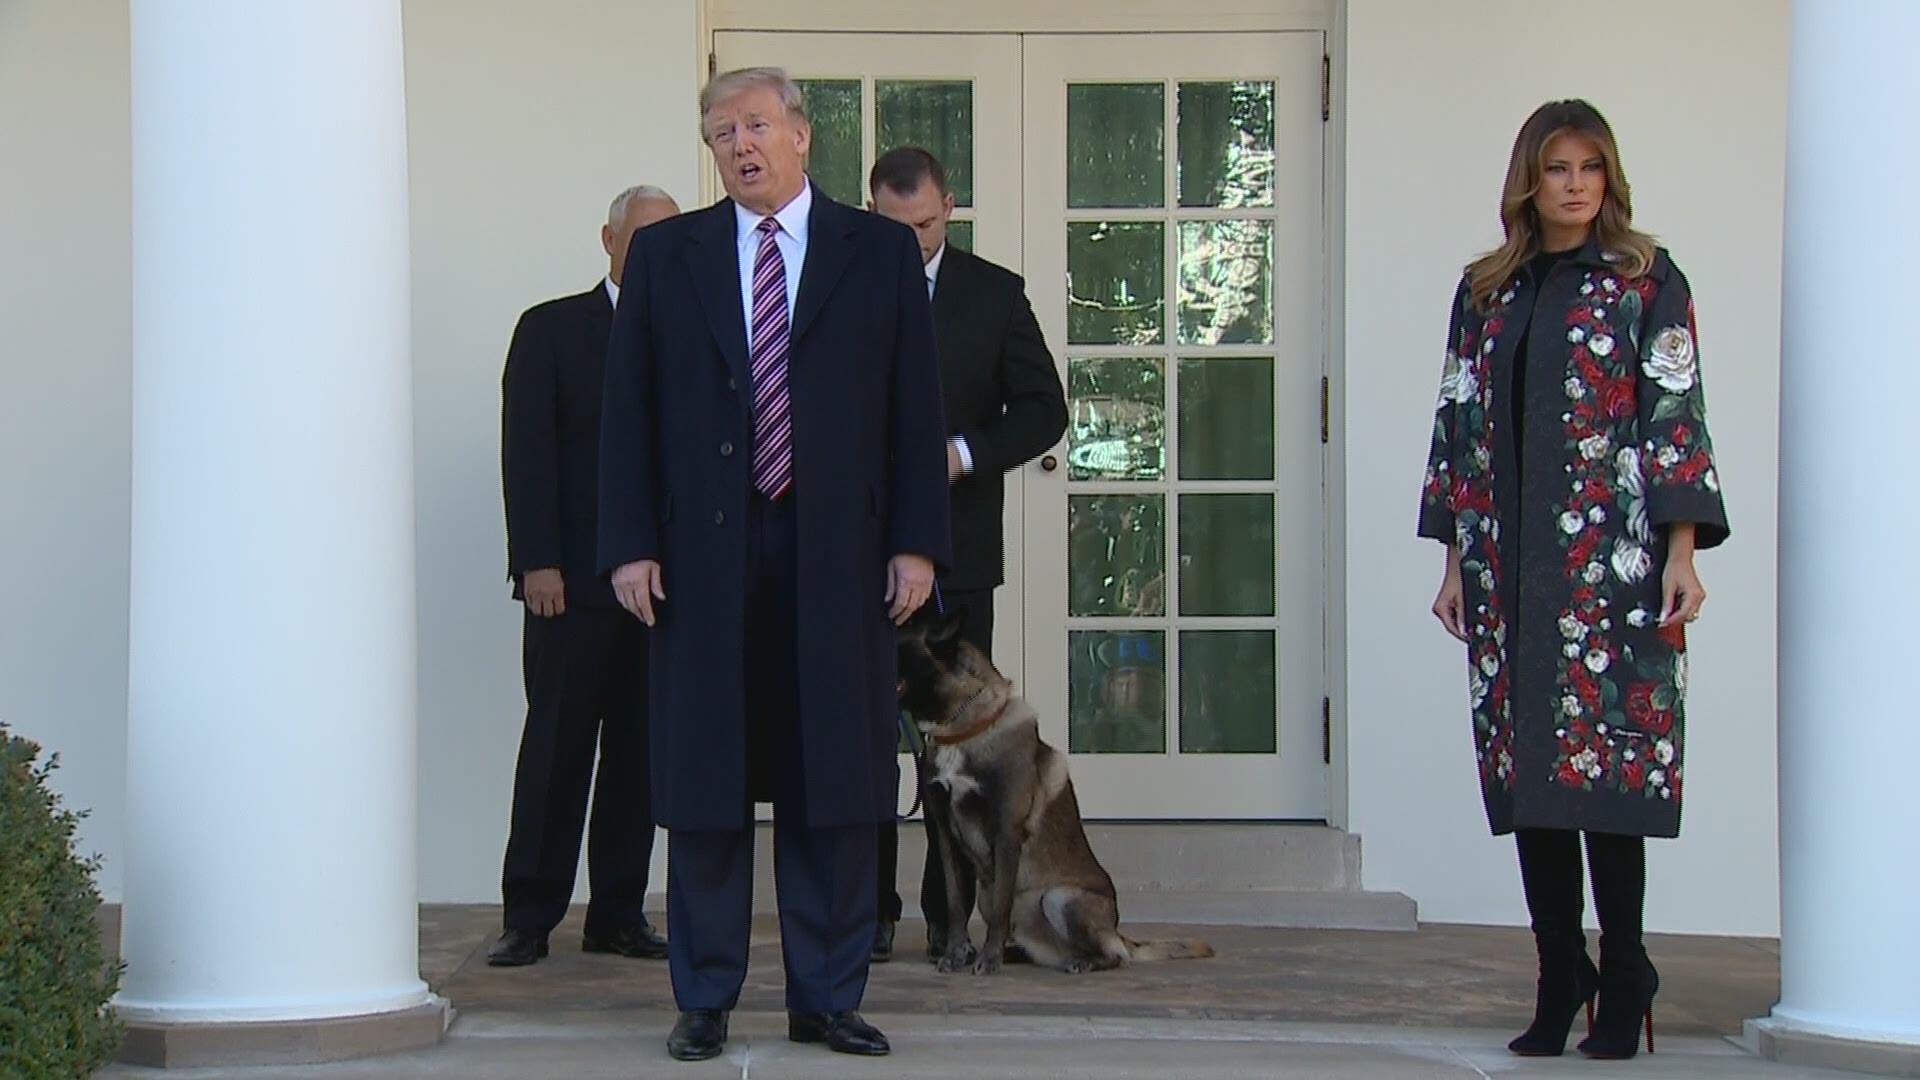 President Donald Trump is honoring the U.S. military dog that participated in the operation that ended with the death of Islamic State leader Abu Bakr al-Baghdadi.